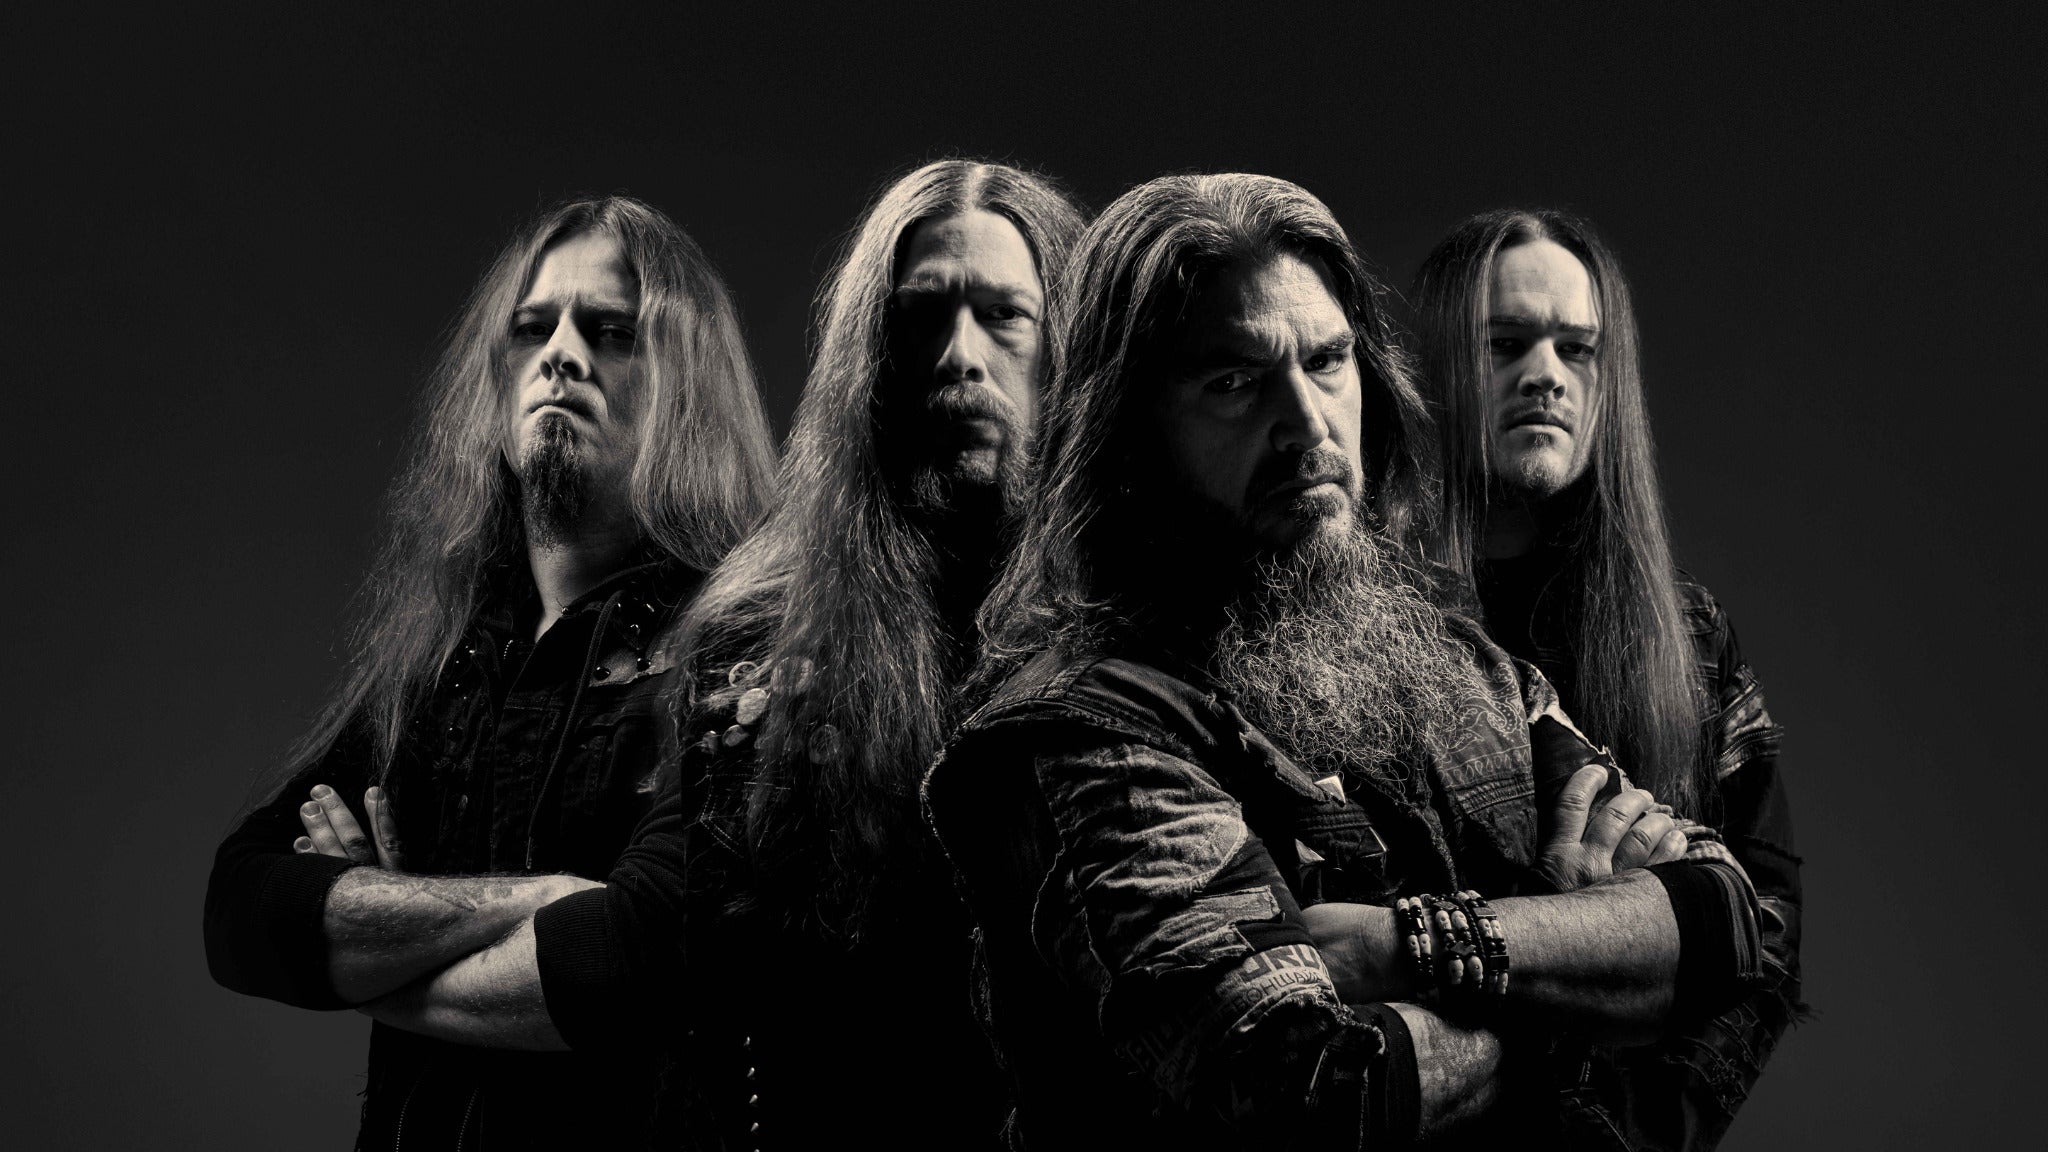 Machine Head - Of Kingdom And Crown Tour in Virginia Beach promo photo for Blabbermouth presale offer code